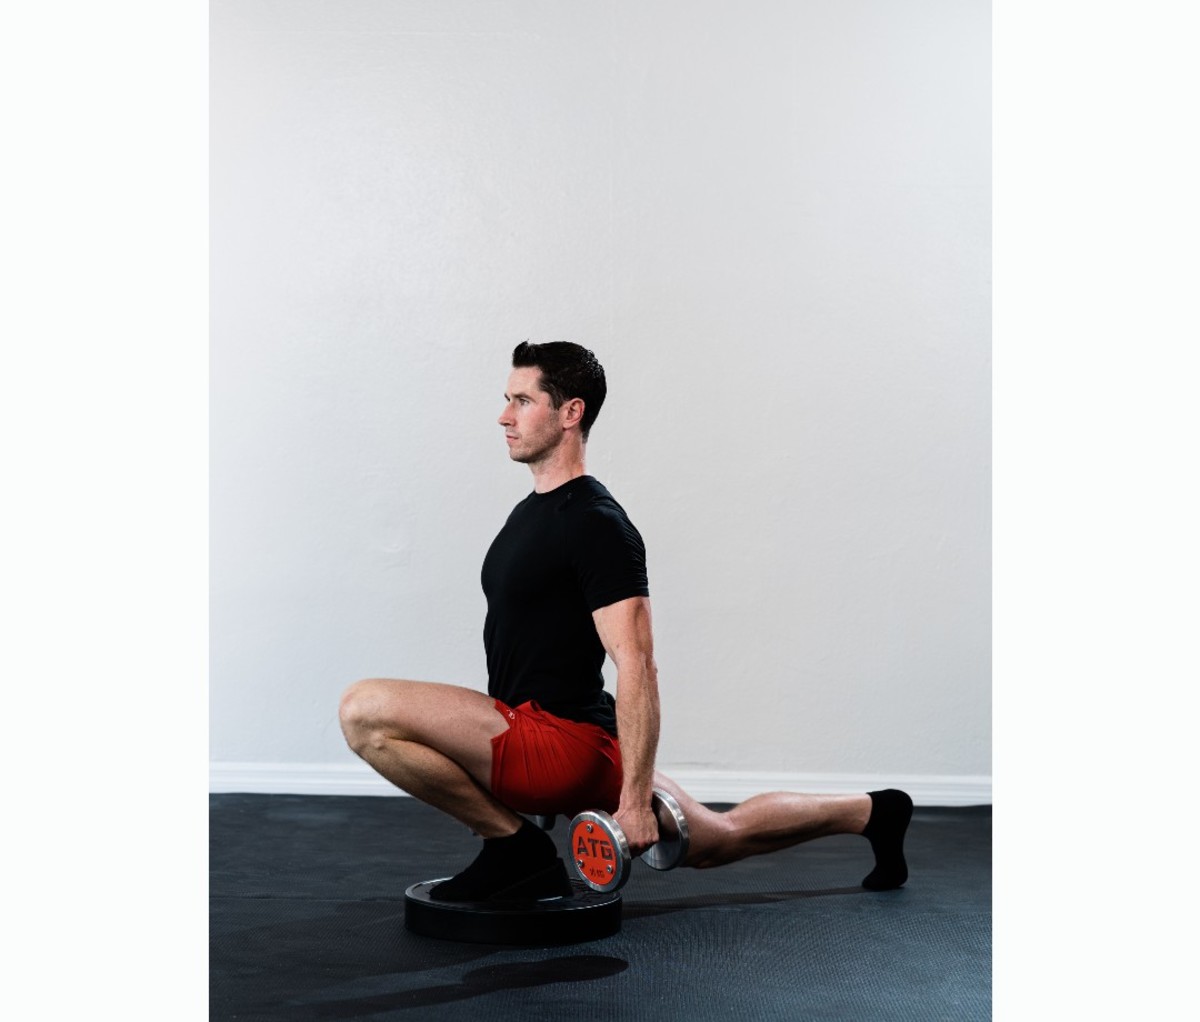 Caucasian man in black t-shirt and red shorts doing exaggerated squats with dumbbells